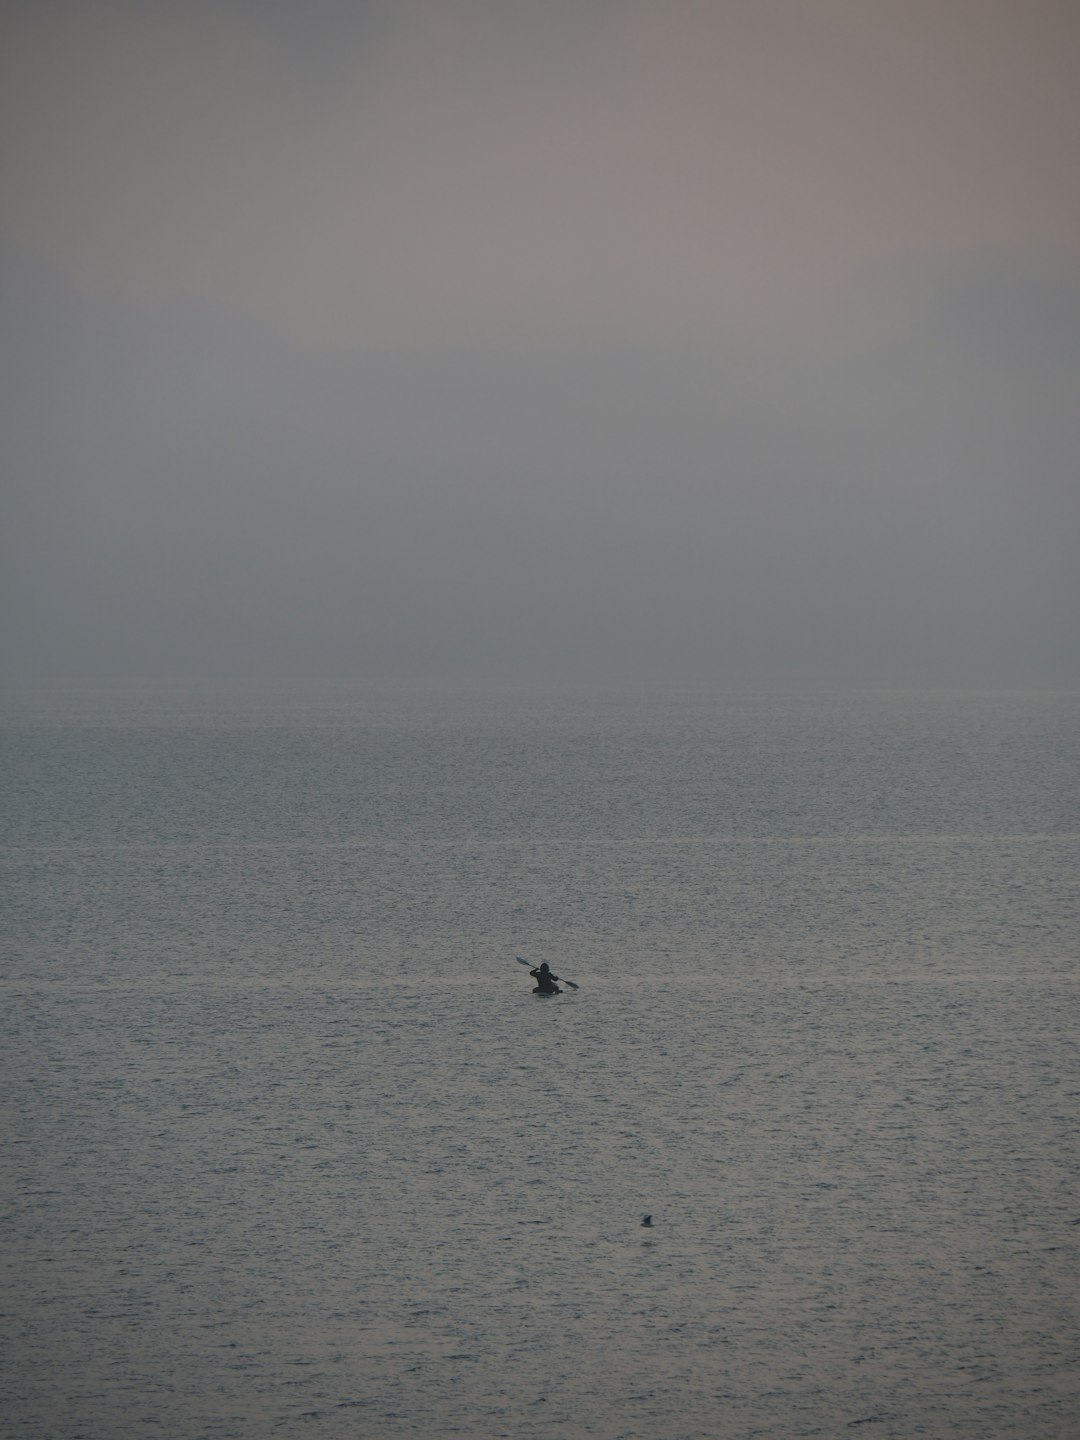 person riding on boat on sea during daytime